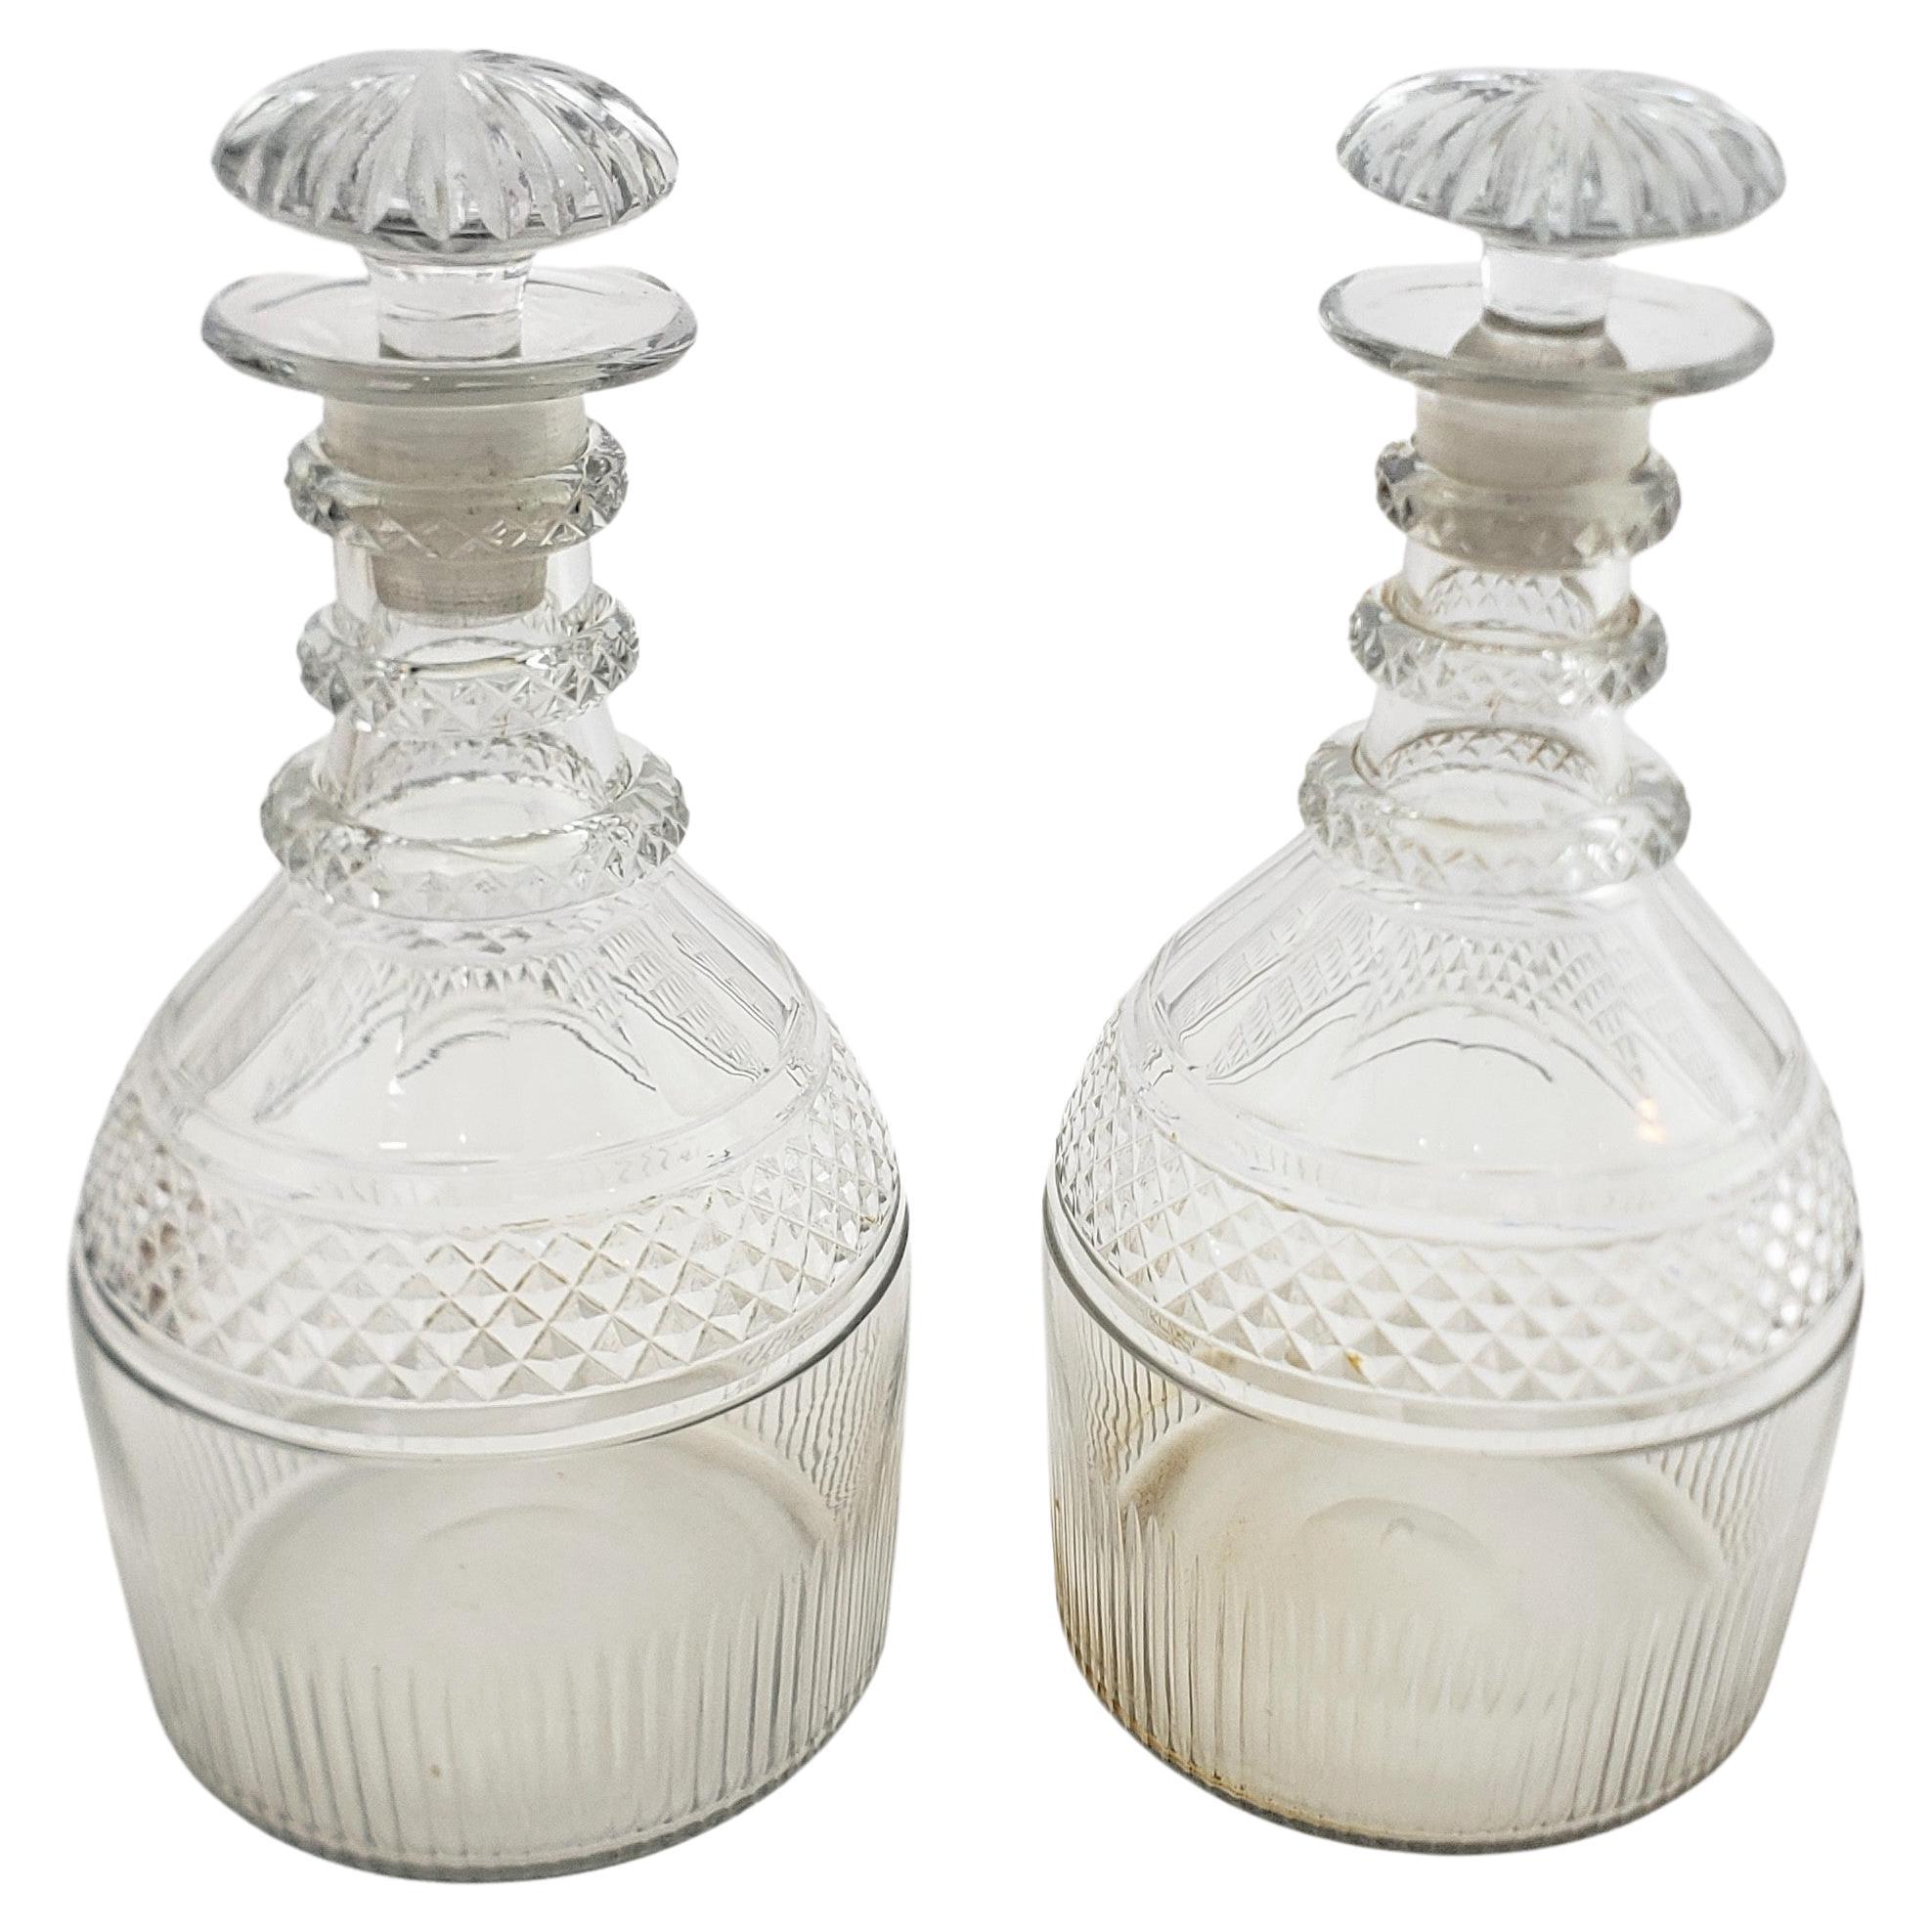 Pair of Antique George III Glass Decanters with 3 Neck Rings & Mushroom Stoppers